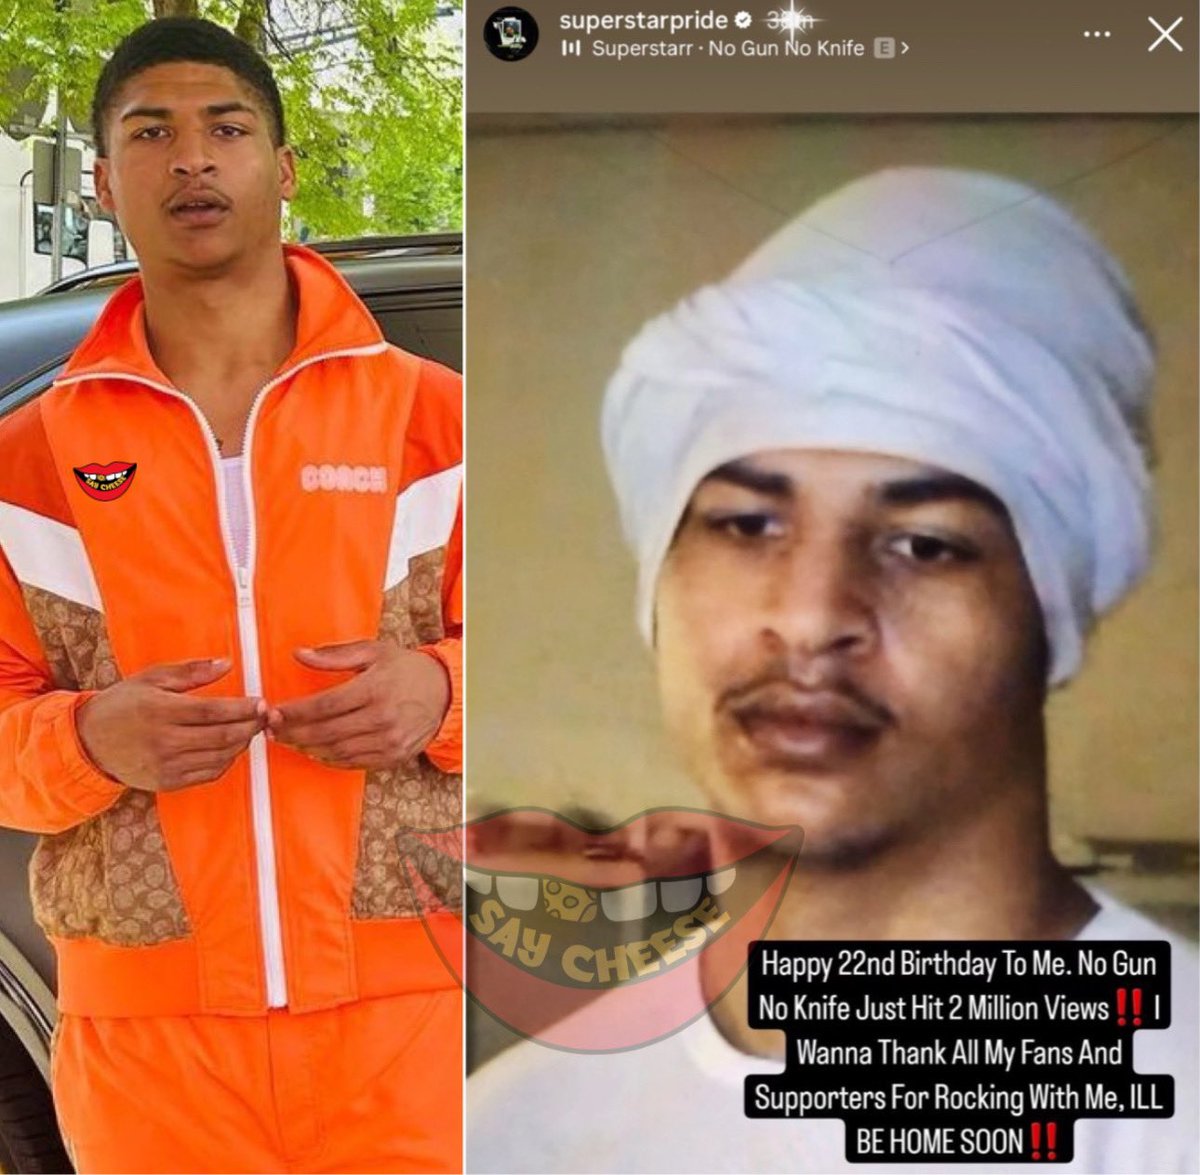 Rapper Superstar Pride, who was arrested and charged with first-degree murder of his barber, says he will be home soon!